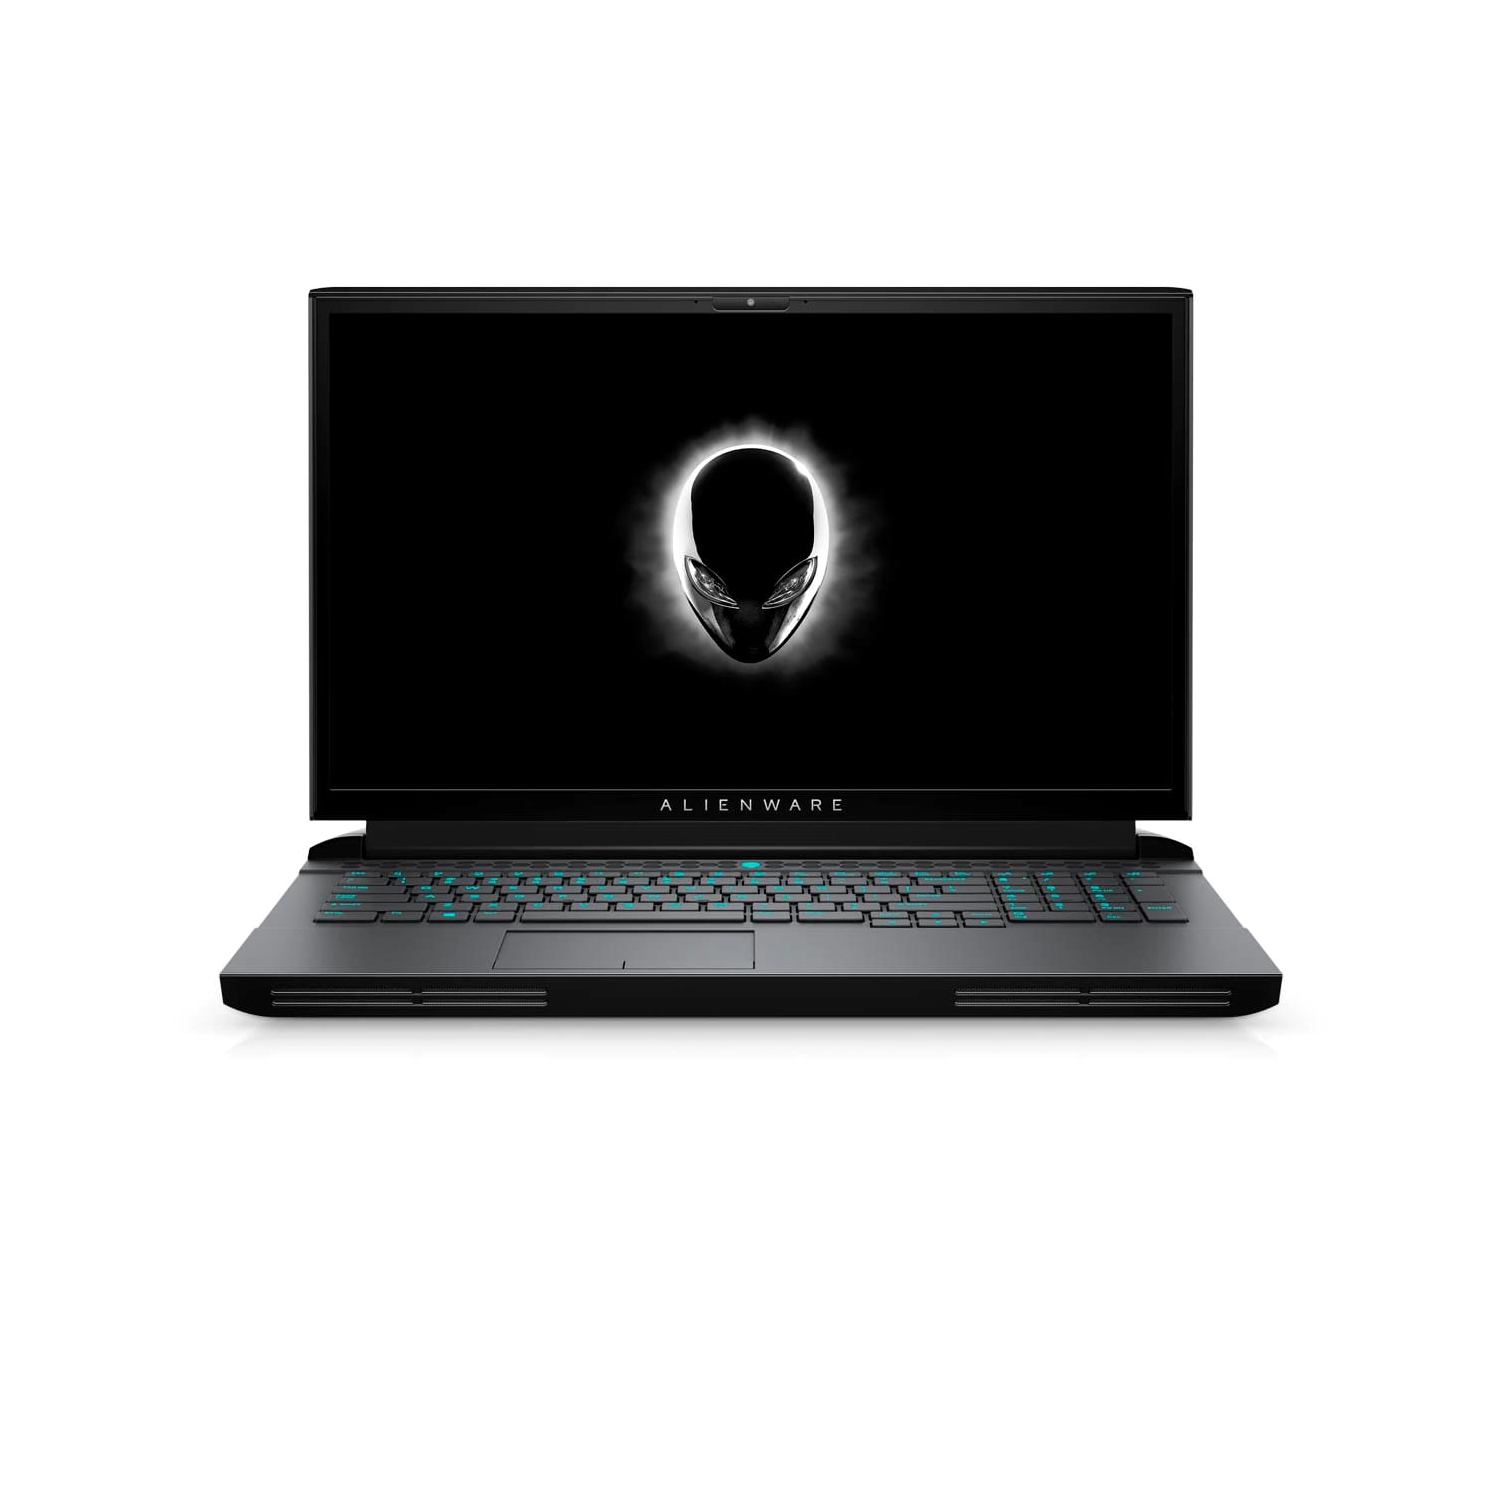 Refurbished (Excellent) - 2020 Dell Alienware 51m R2 Laptop 17.3" - Intel Core i7-10700 4.8Ghz - 512GB SSD + 512GB SSD - 16GB RAM - GeForce RTX2070 Super - Certified